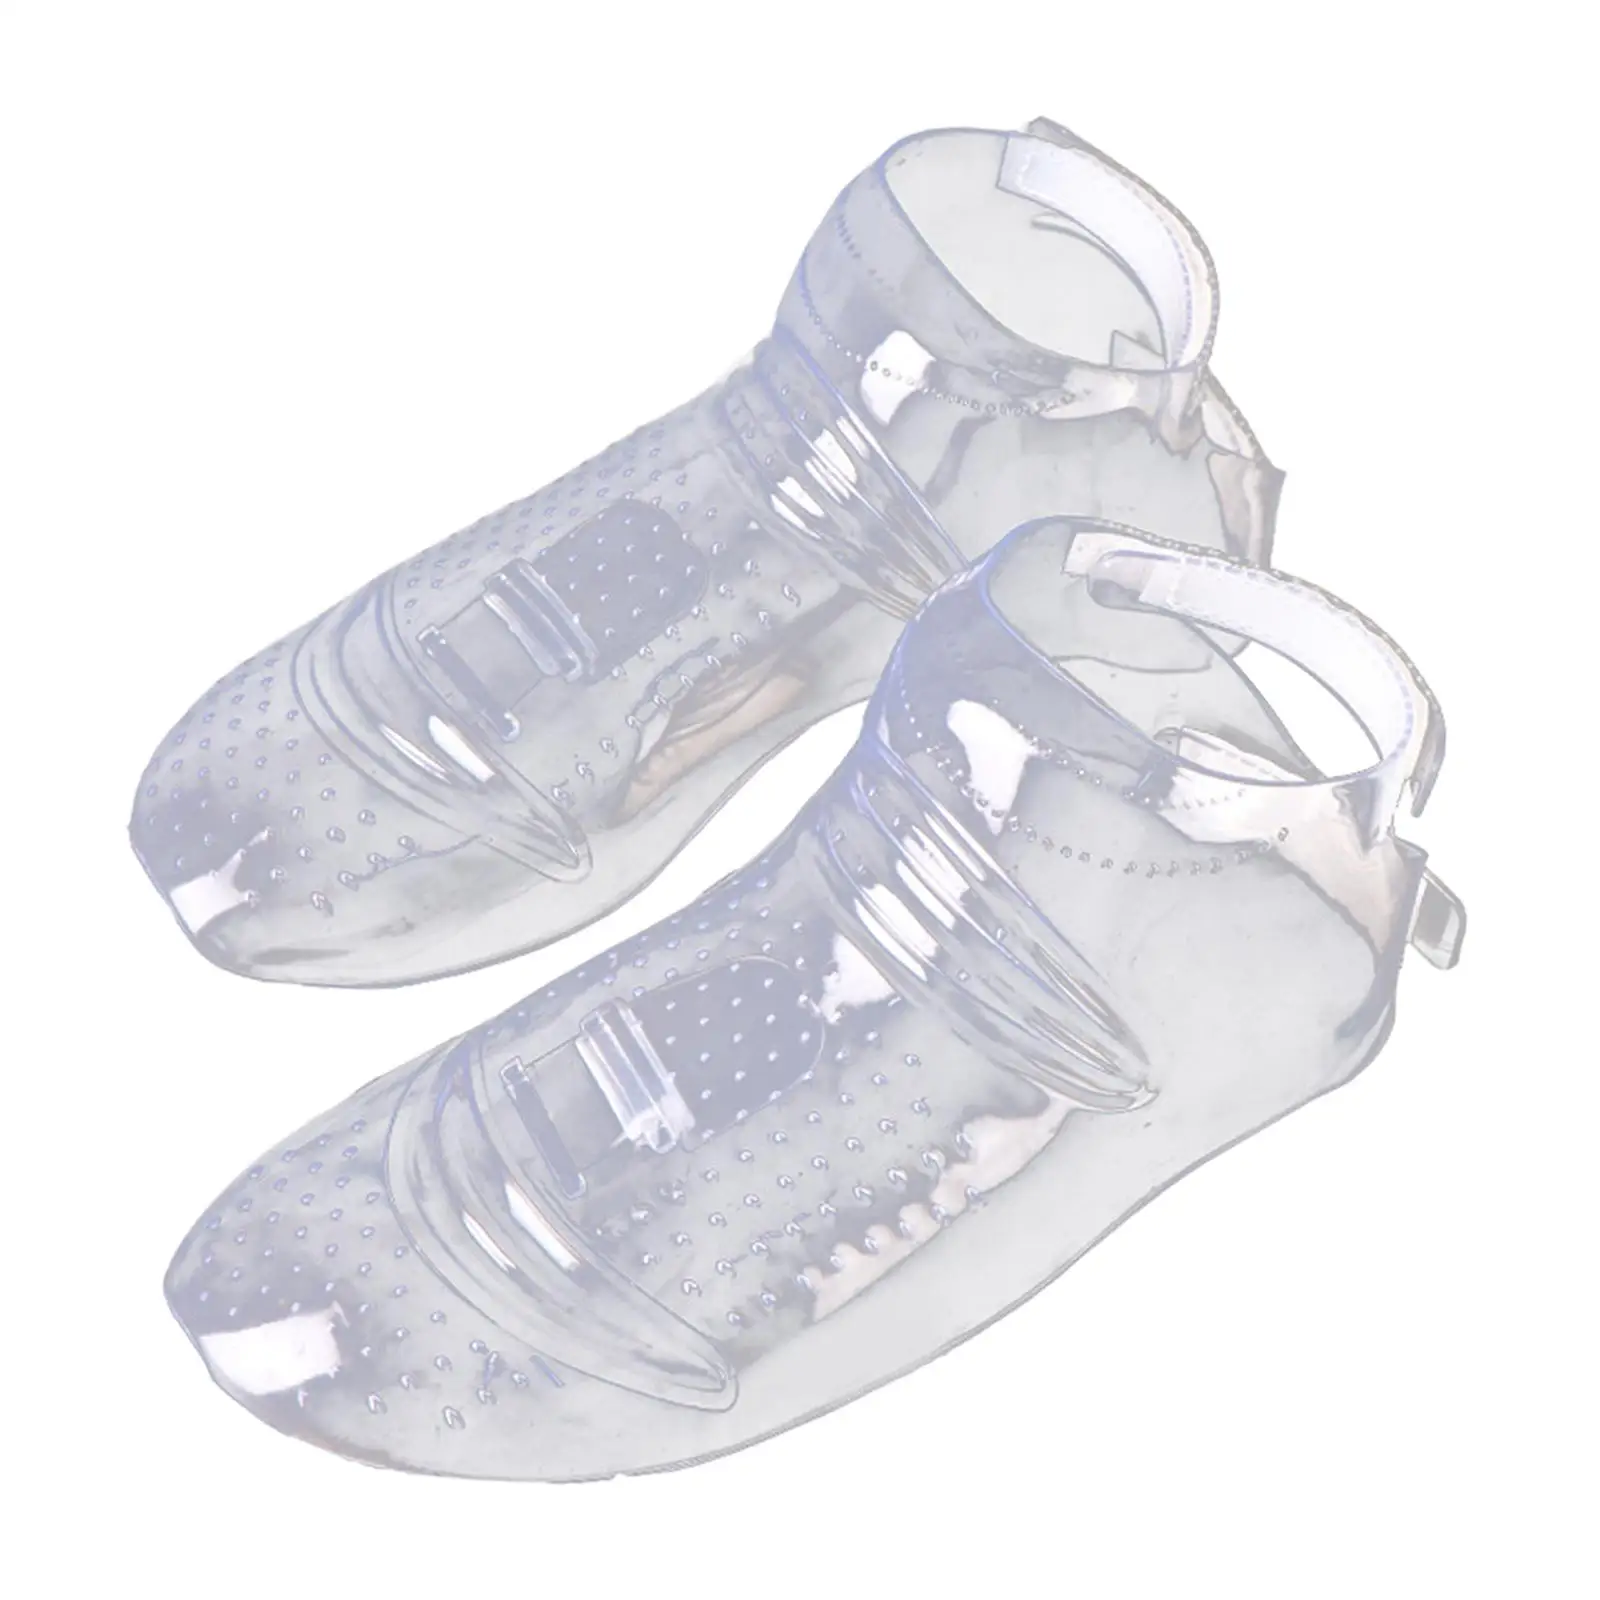 Barber Shoe Cover Wearproof Clear Adjustable Shaving Hairdressing Shoes Cover for Barber Haircut Styling Tool Hairdressing Salon